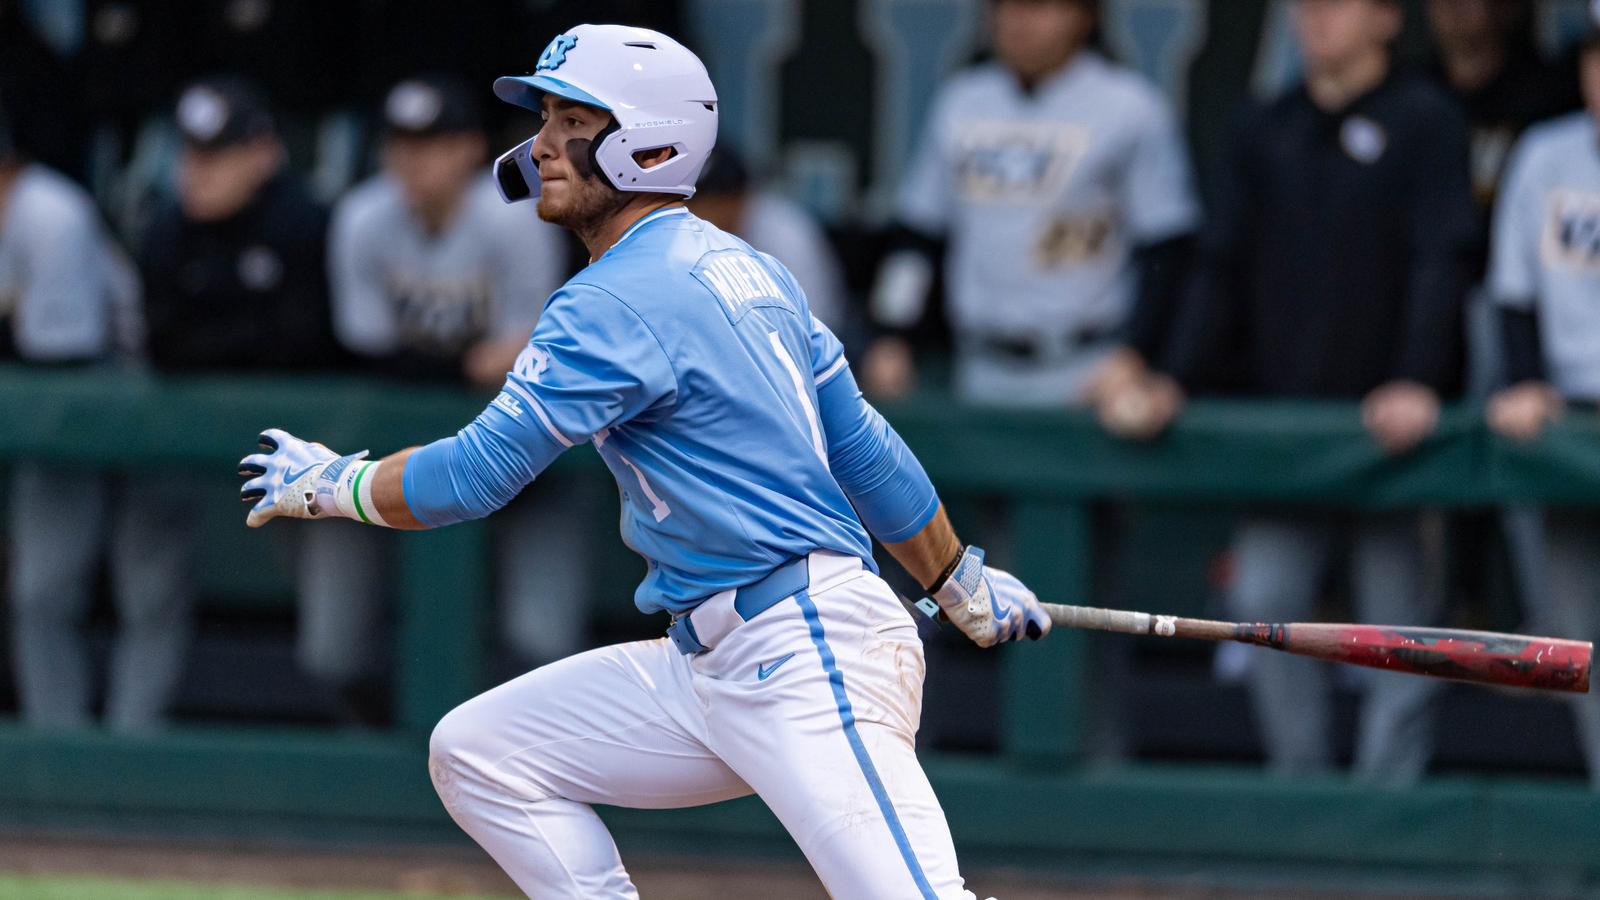 Pair Of Midweek Games On Tap For No. 12 UNC Baseball